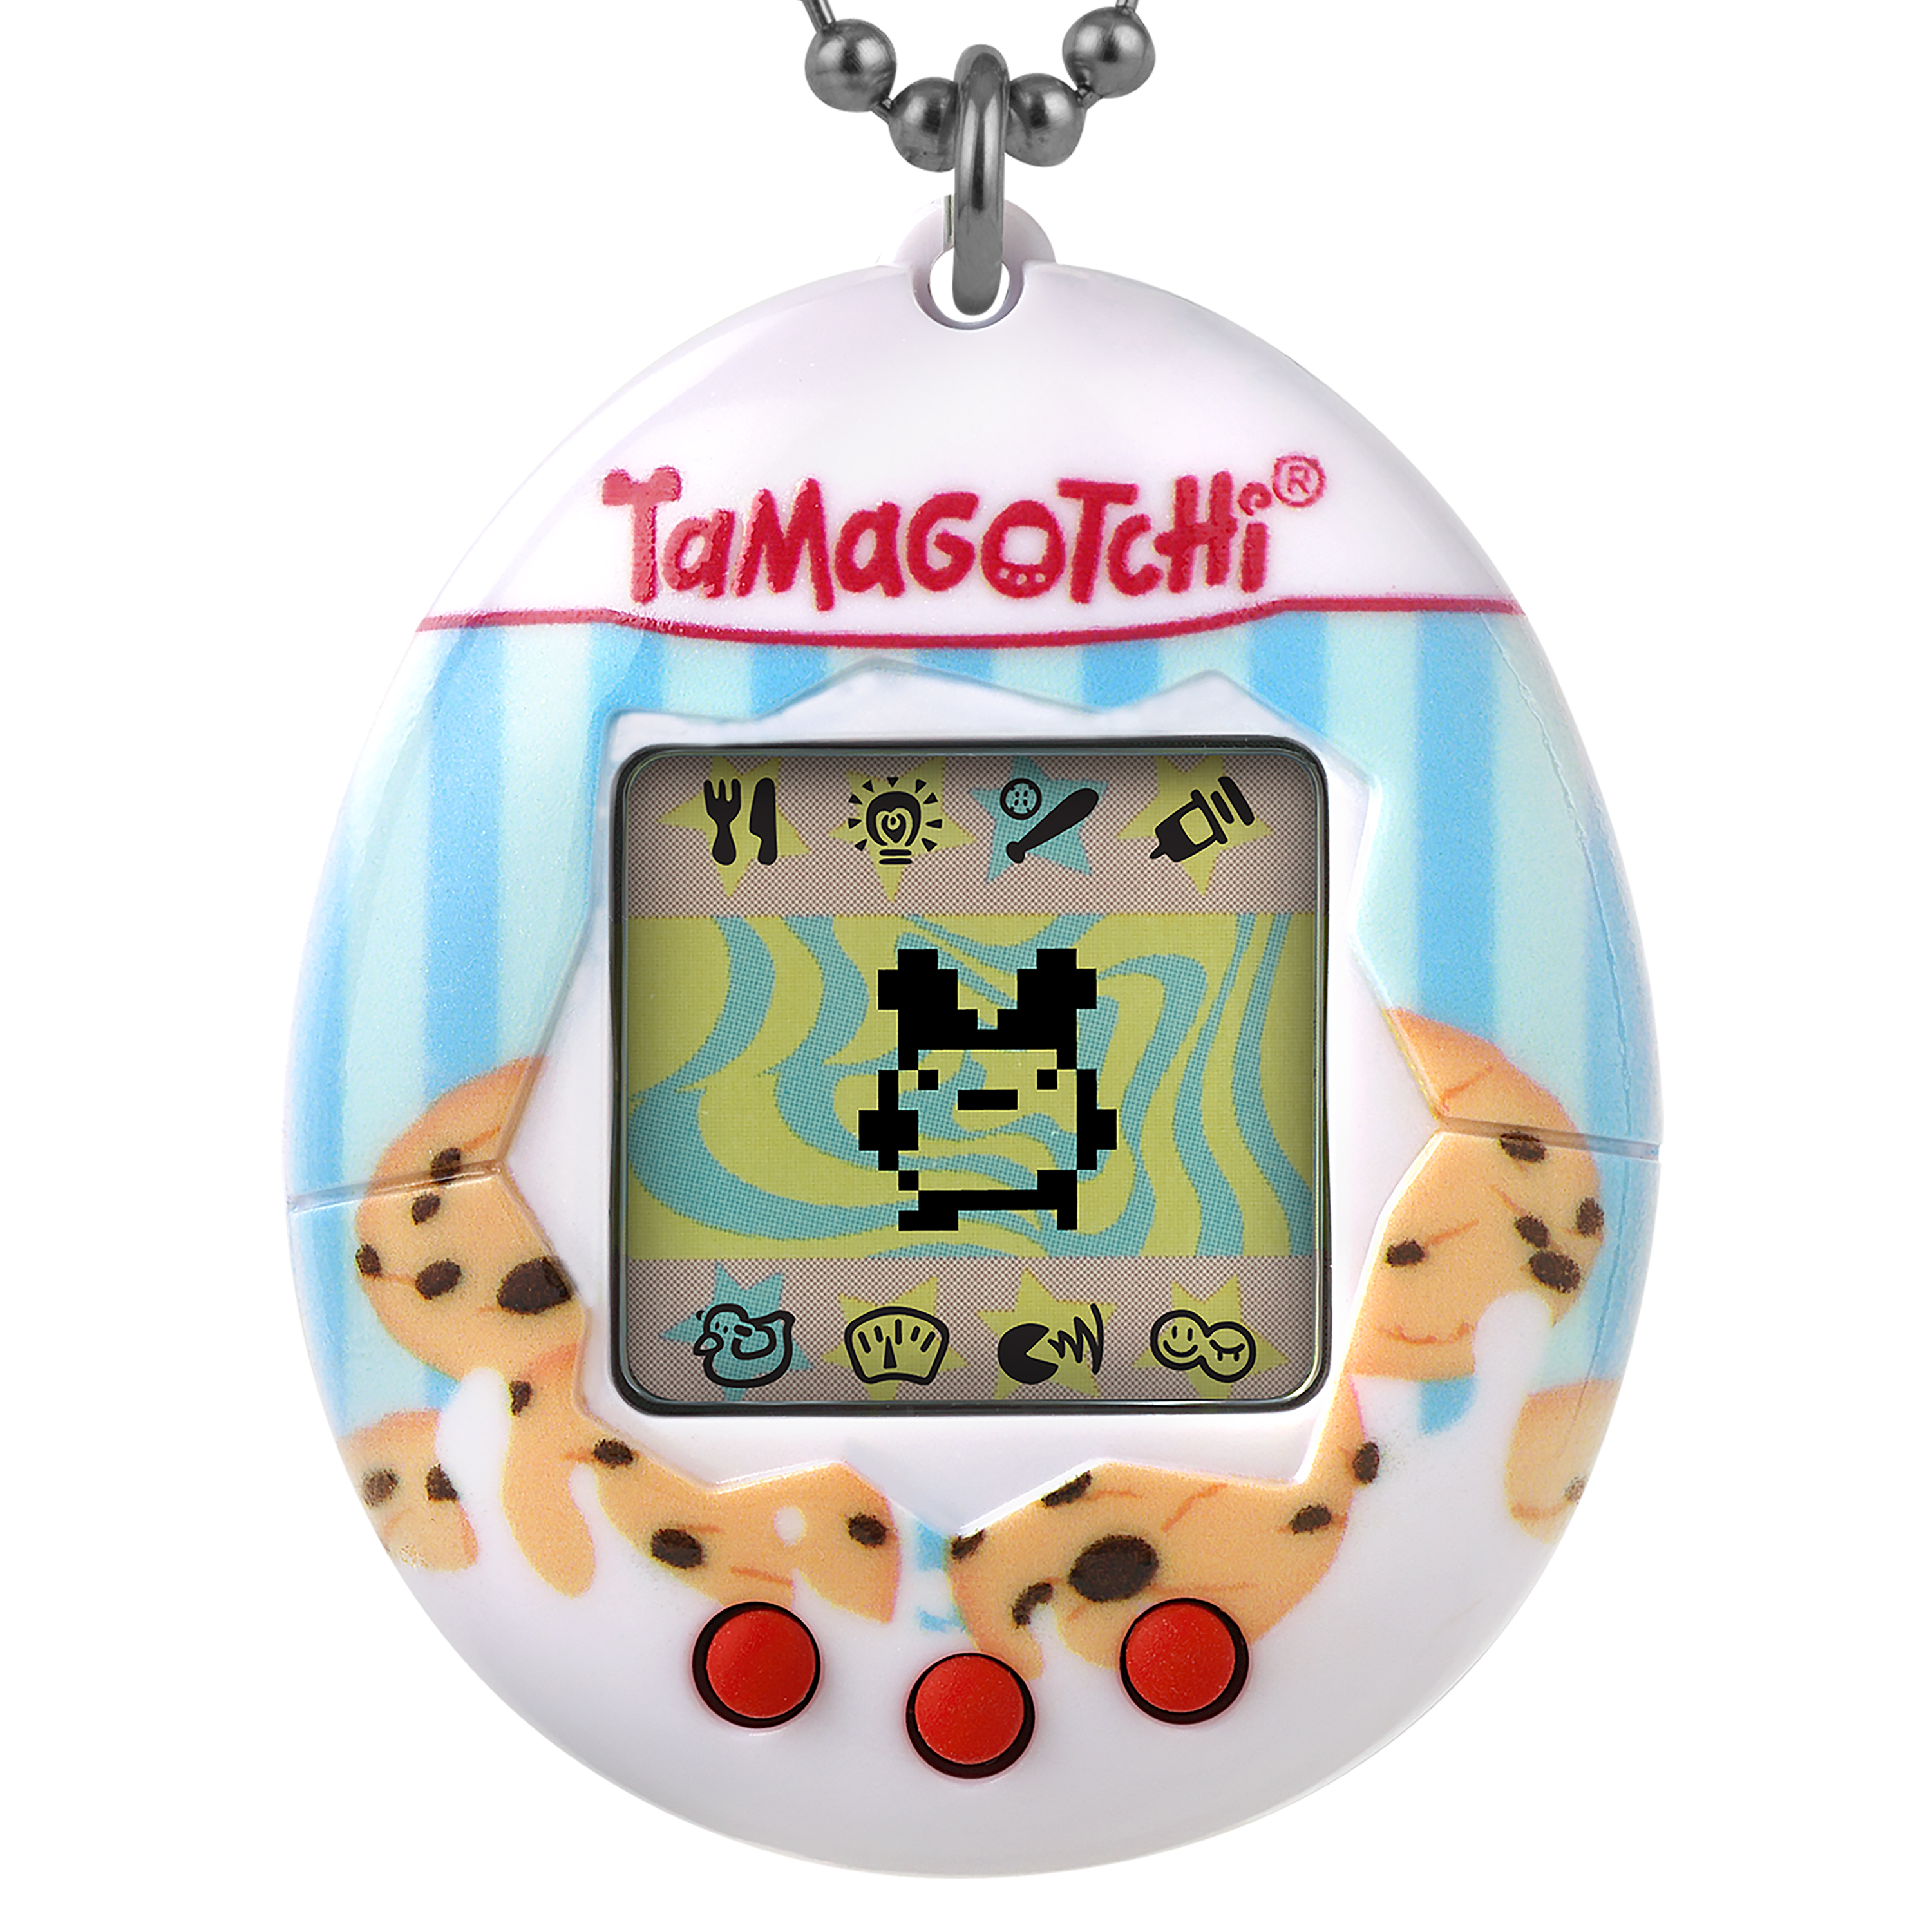 Original Tamagotchi - Milk and Cookies  PREMIUM BANDAI USA Online Store  for Action Figures, Model Kits, Toys and more